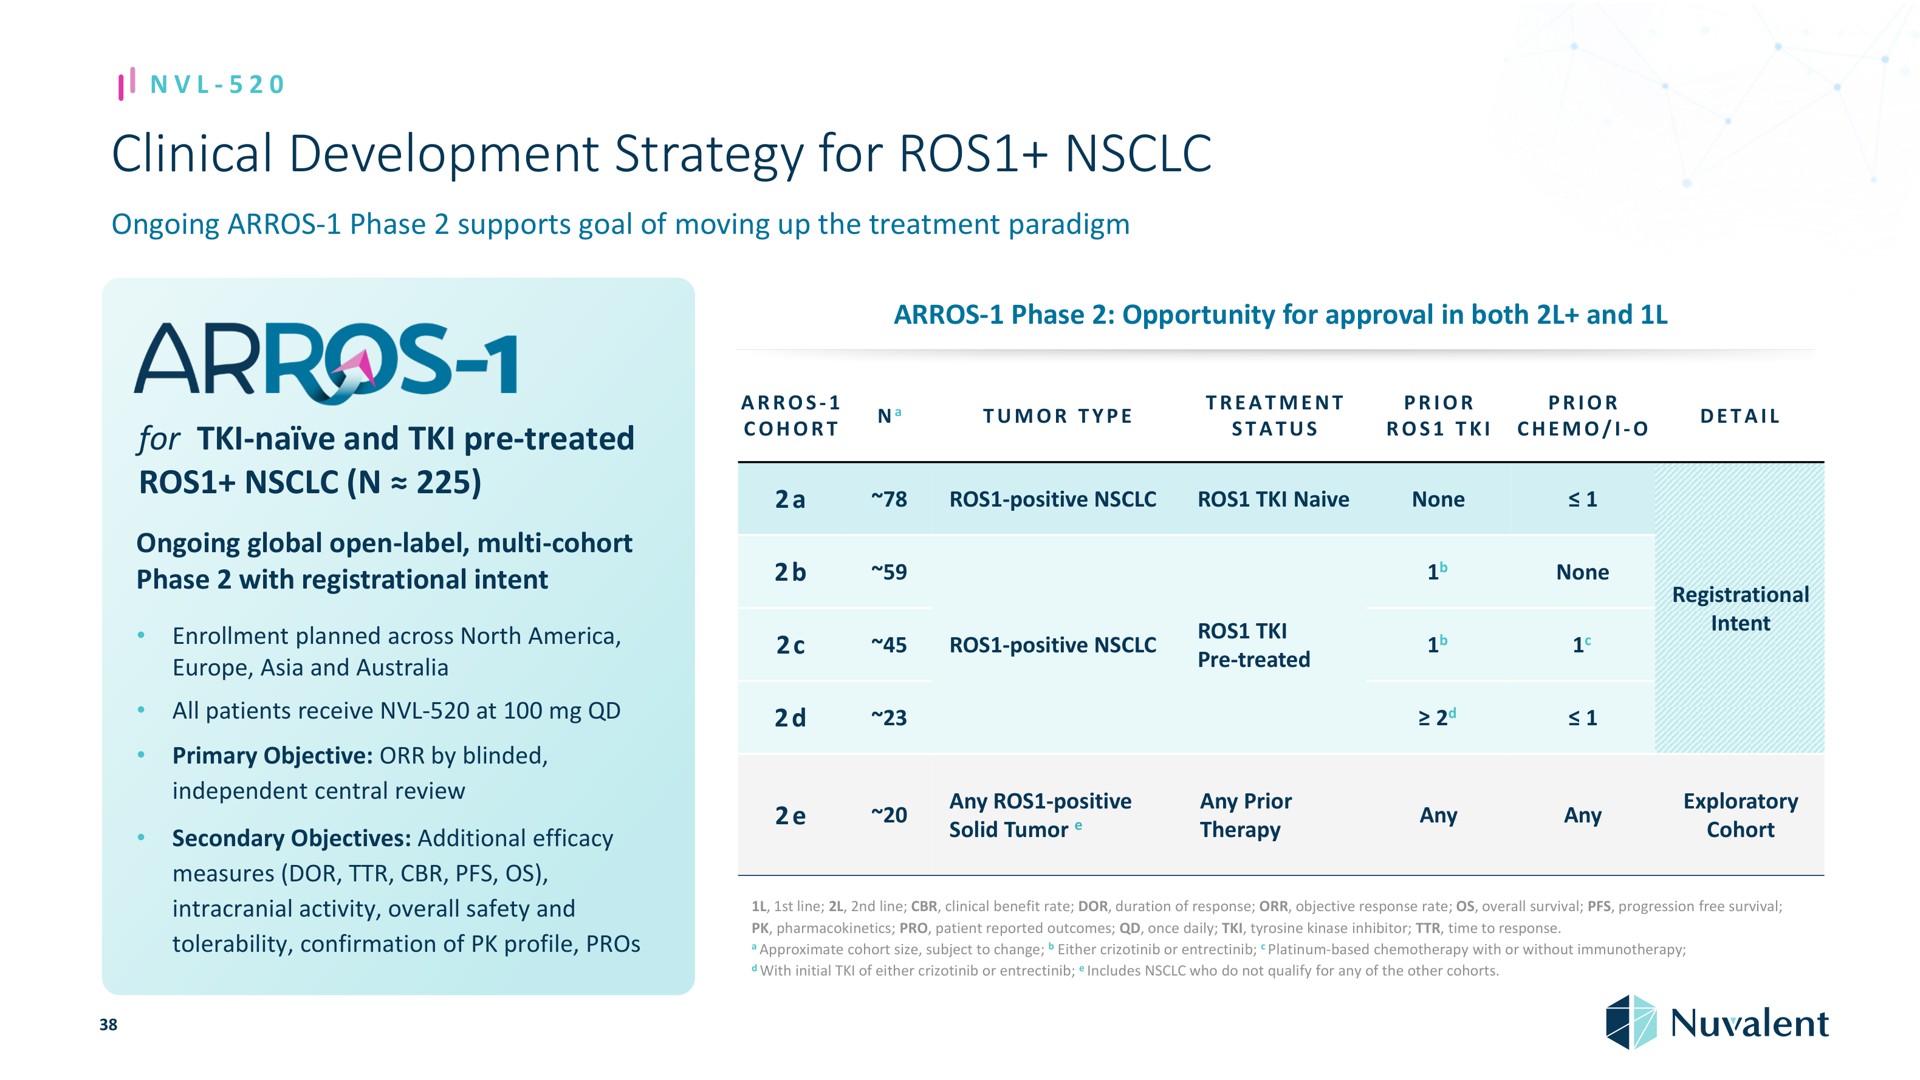 clinical development strategy for ongoing phase supports goal of moving up the treatment paradigm naive and treated ongoing global open label cohort phase with registrational intent enrollment planned across north and all patients receive at primary objective by blinded independent central review secondary objectives additional efficacy measures dor intracranial activity overall safety and tolerability confirmation of profile pros phase opportunity approval in both and cohort tumor type treatment status prior prior i a positive naive none none positive treated any positive solid tumor any prior therapy registrational intent exploratory cohort an any line line benefit rate dor duration of response objective response rate overall survival progression free survival pro patient reported outcomes once daily tyrosine kinase inhibitor time to response approximate cohort size subject to change either or platinum based chemotherapy with or without with initial of either or includes who do not qualify any of the other cohorts | Nuvalent